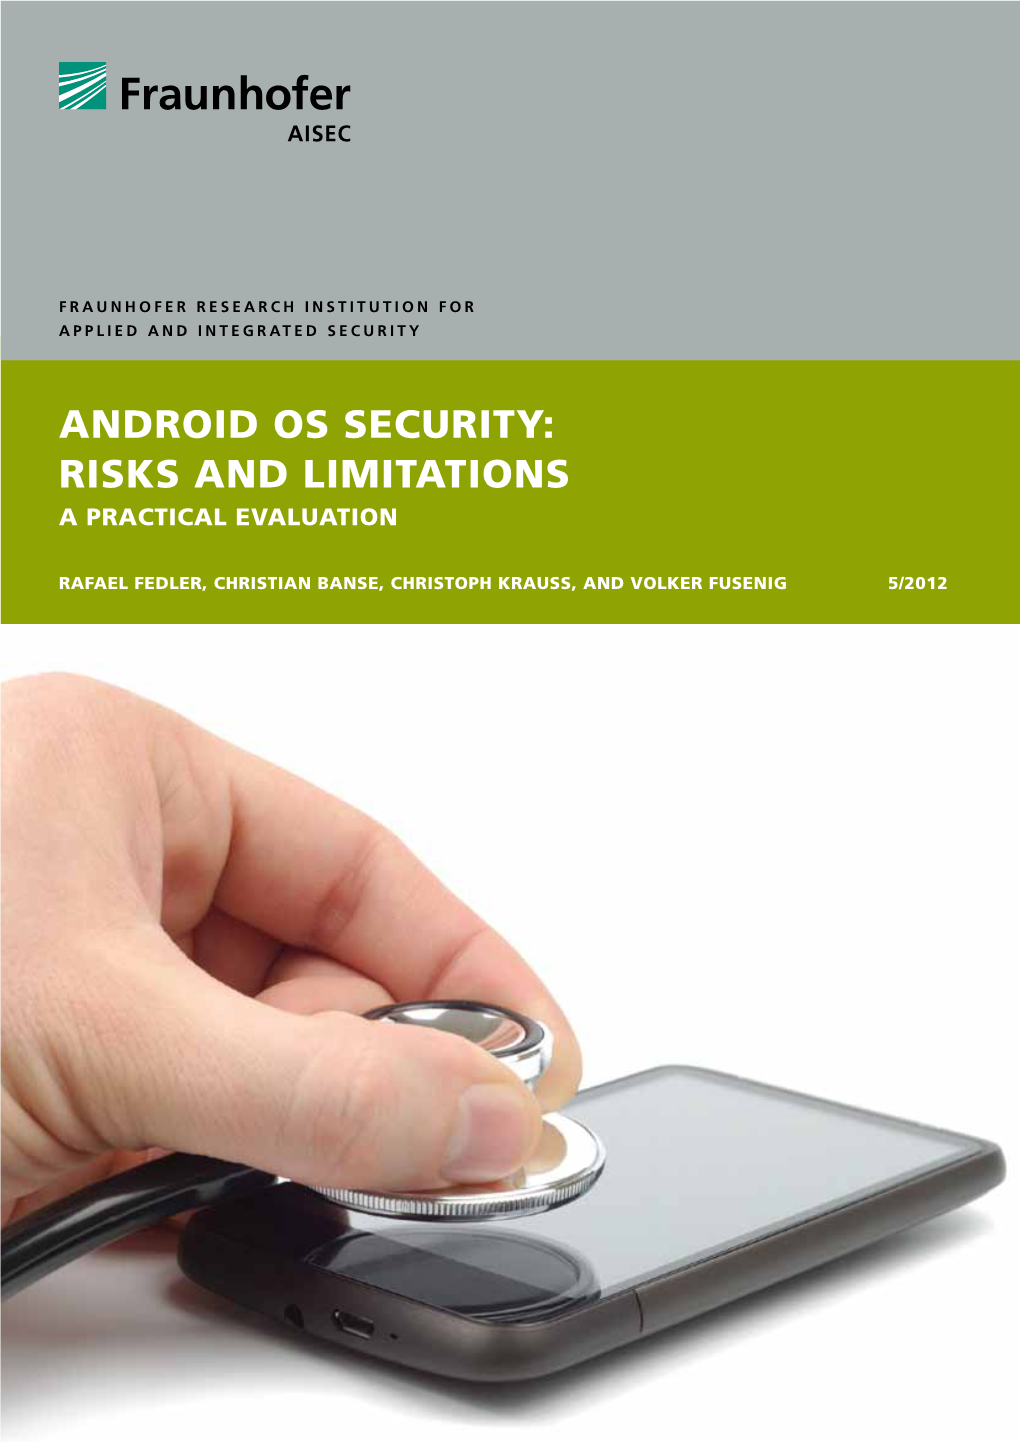 Android OS Security: Risks and Limitations a Practical Evaluation